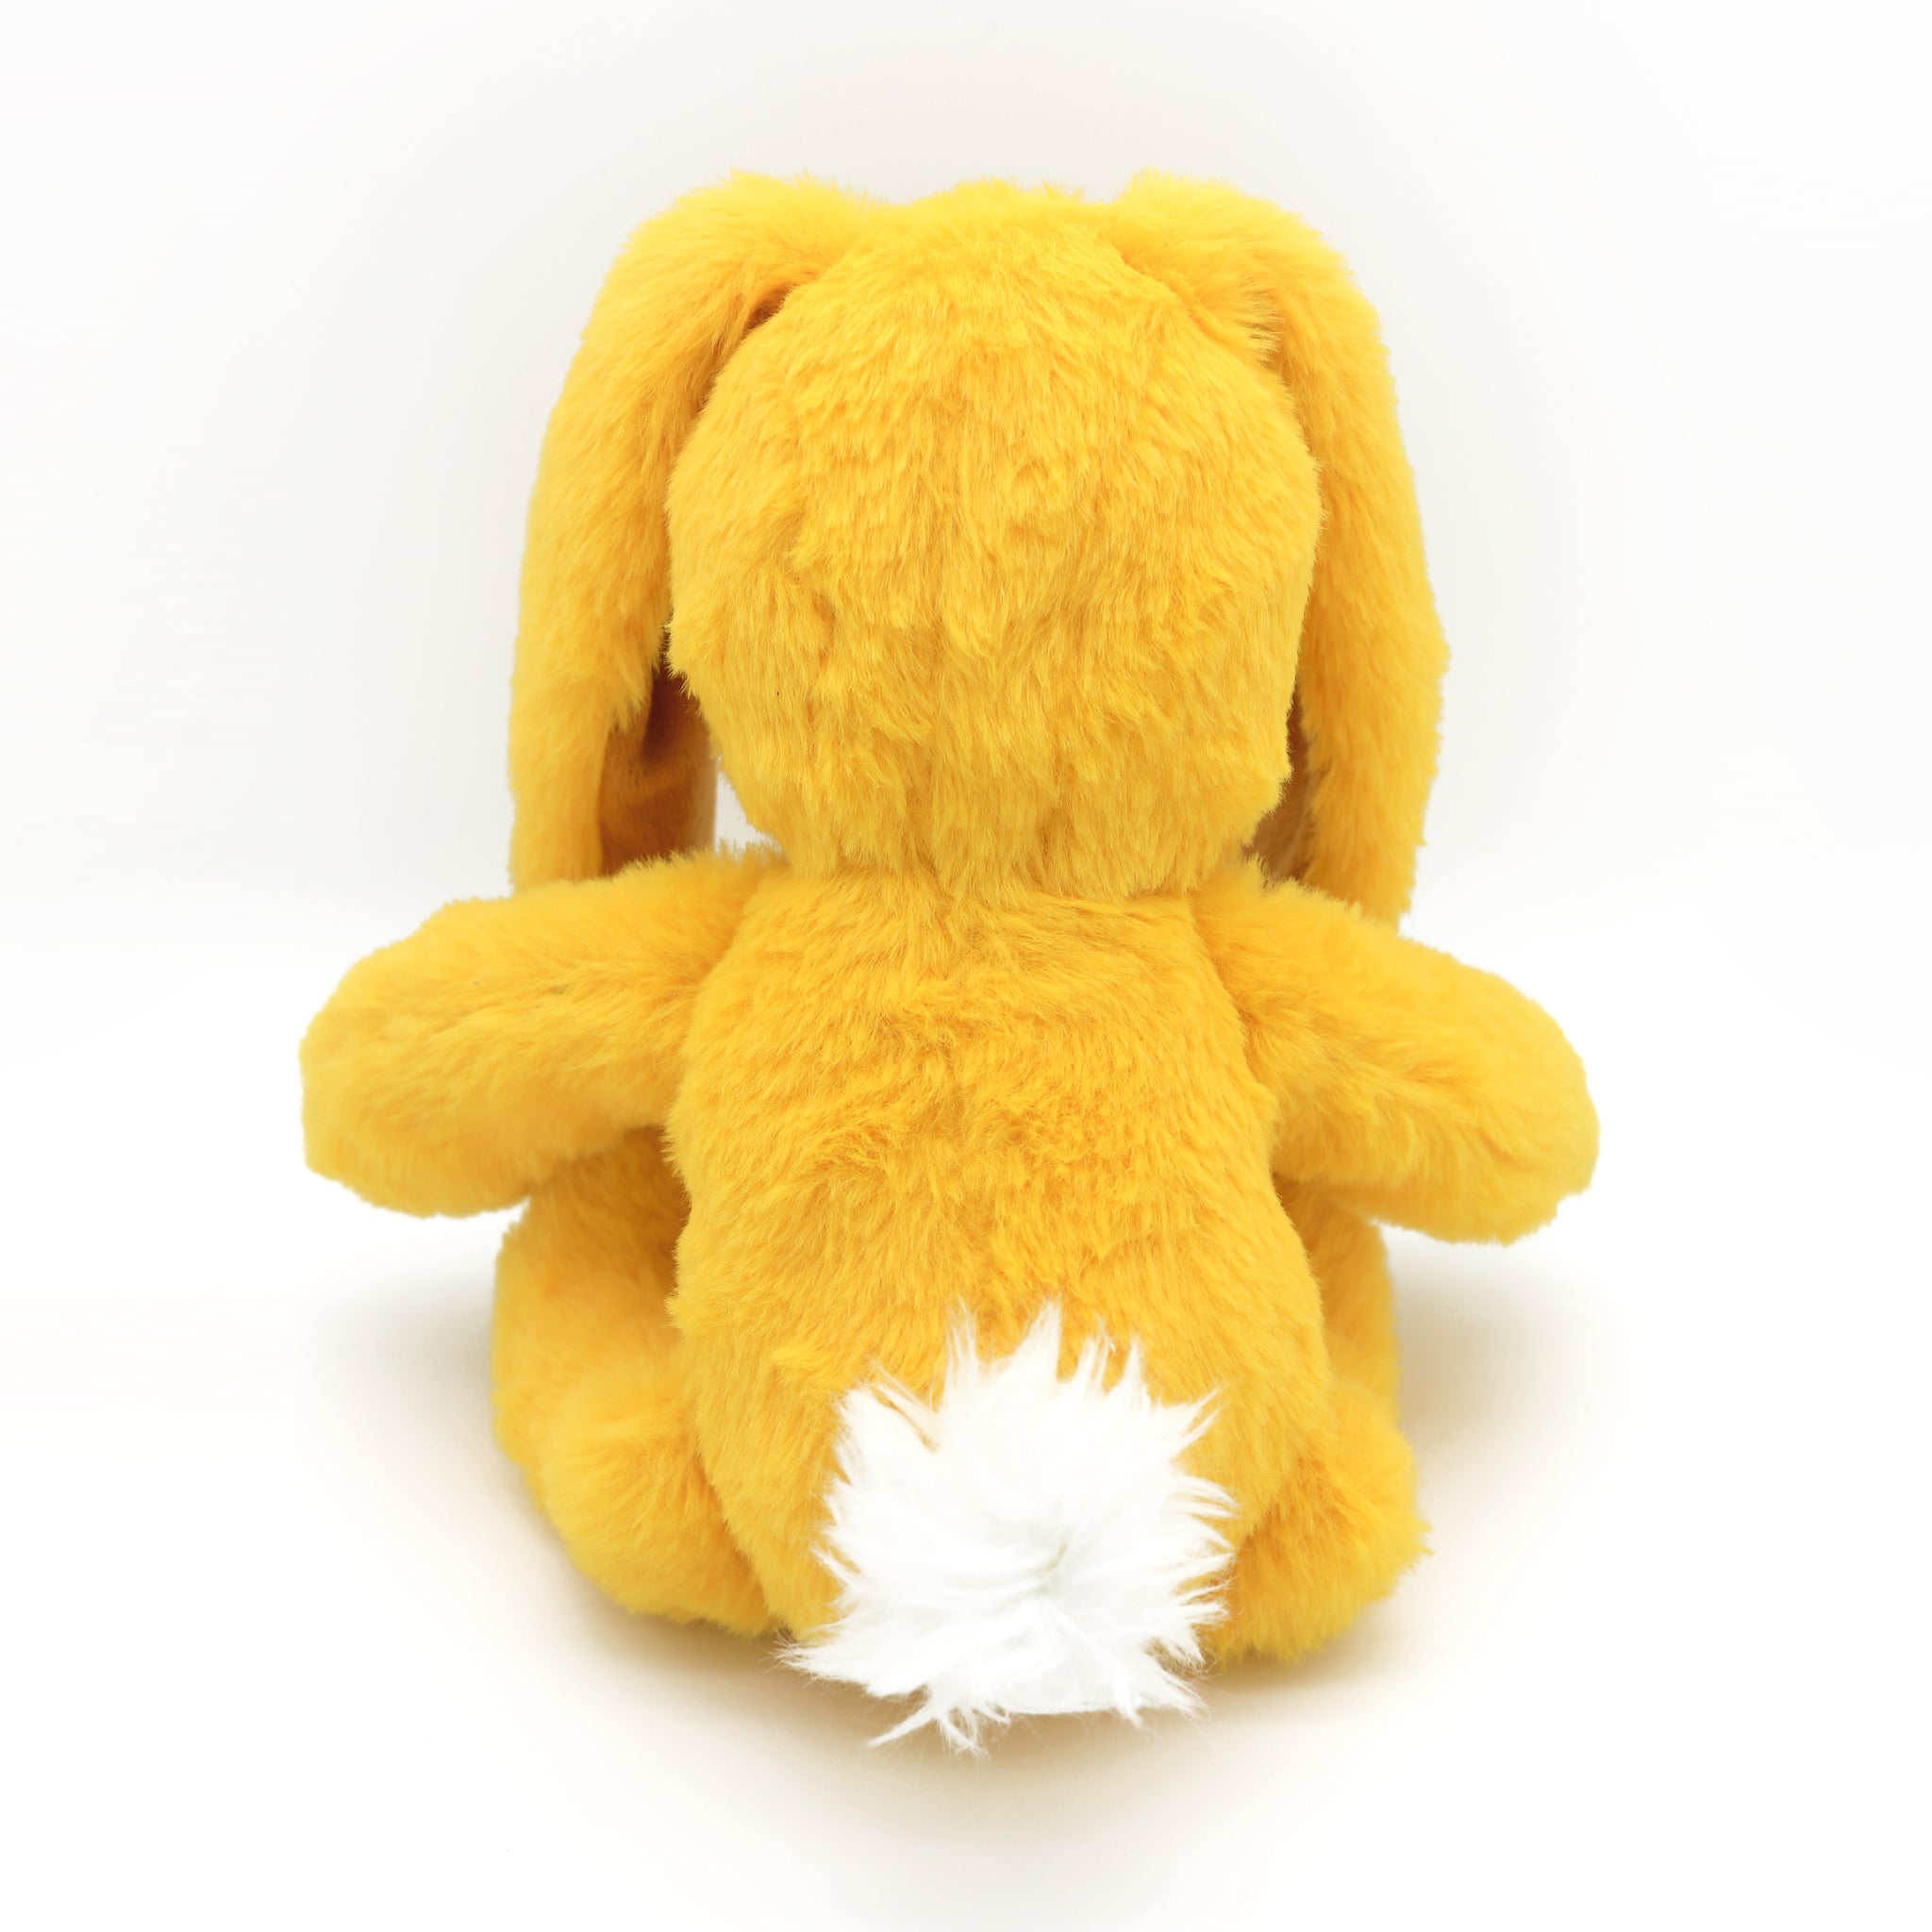 Zeke's Bunny Abacus: The Yellow Stuffed Plush has a cute little cotton tail on his precious little fanny